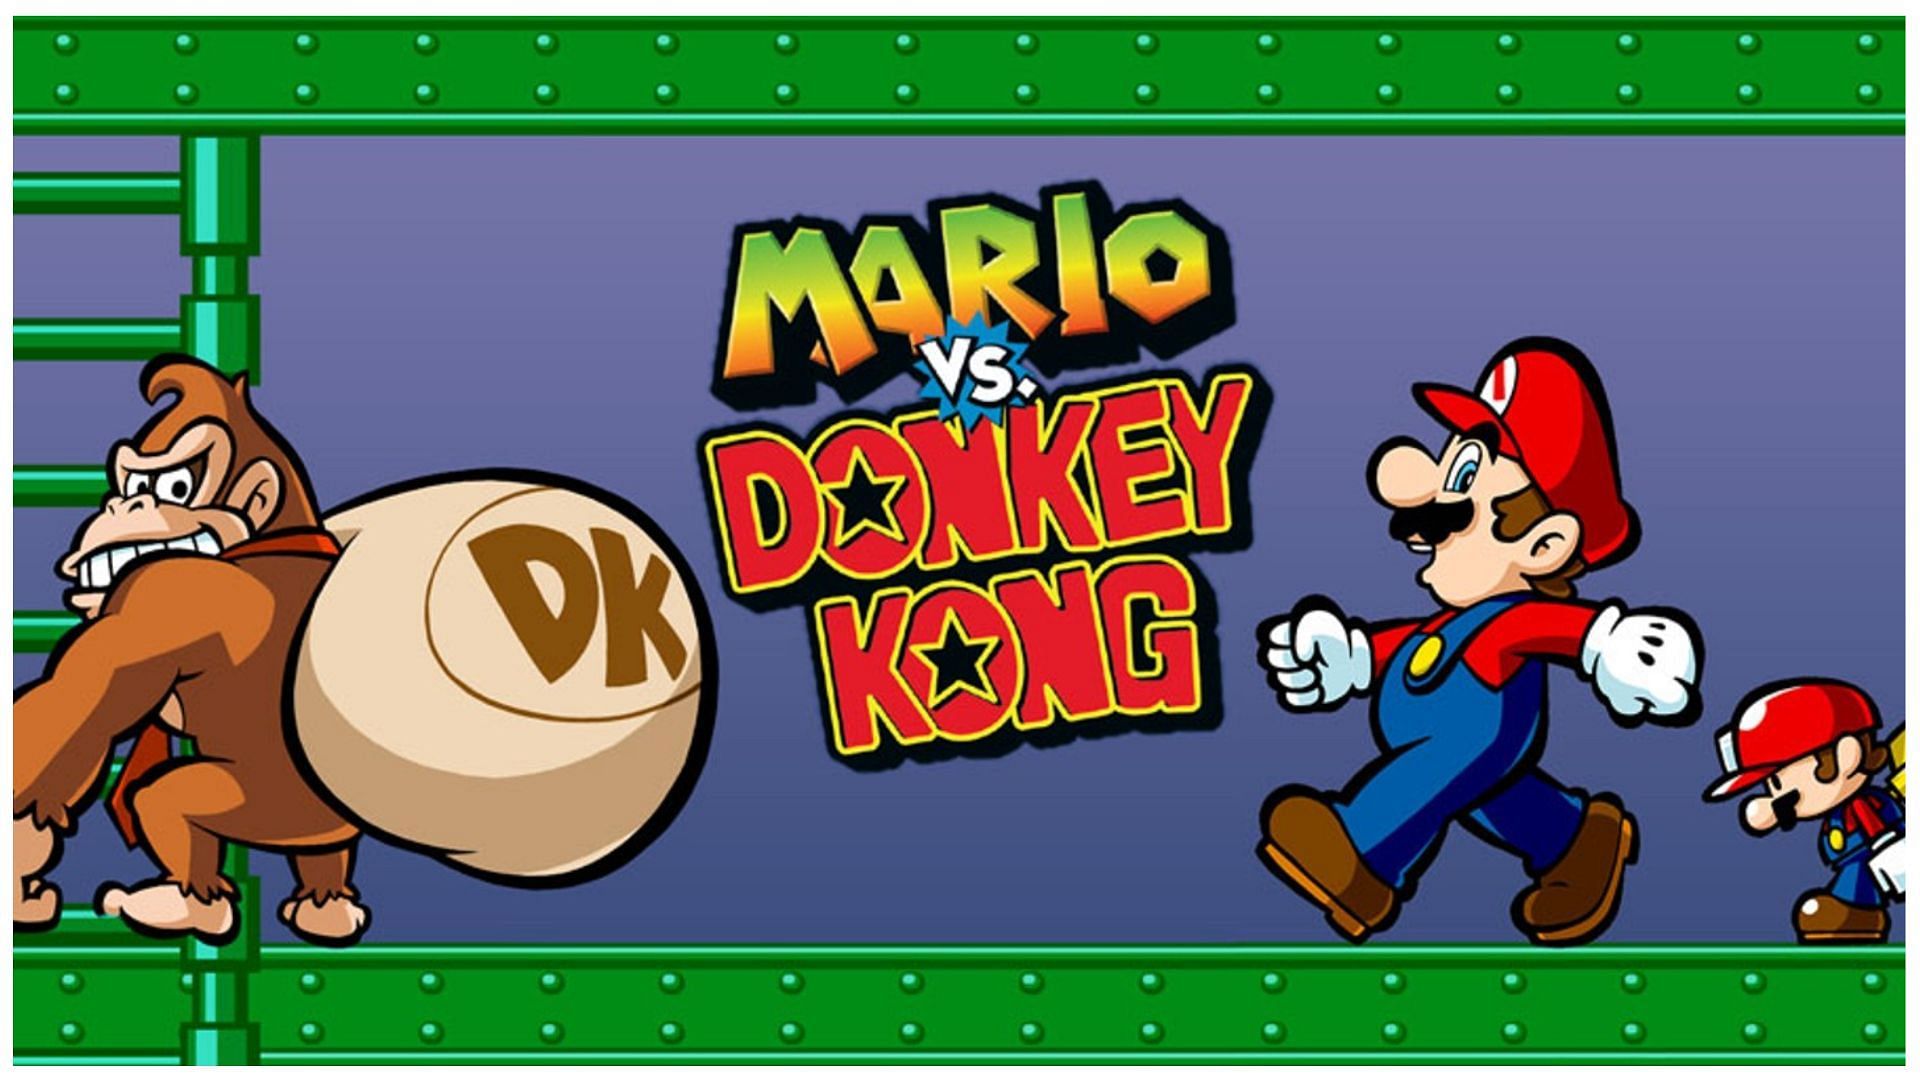 Mario and Kong in action (Images via Nintendo Software Technology)